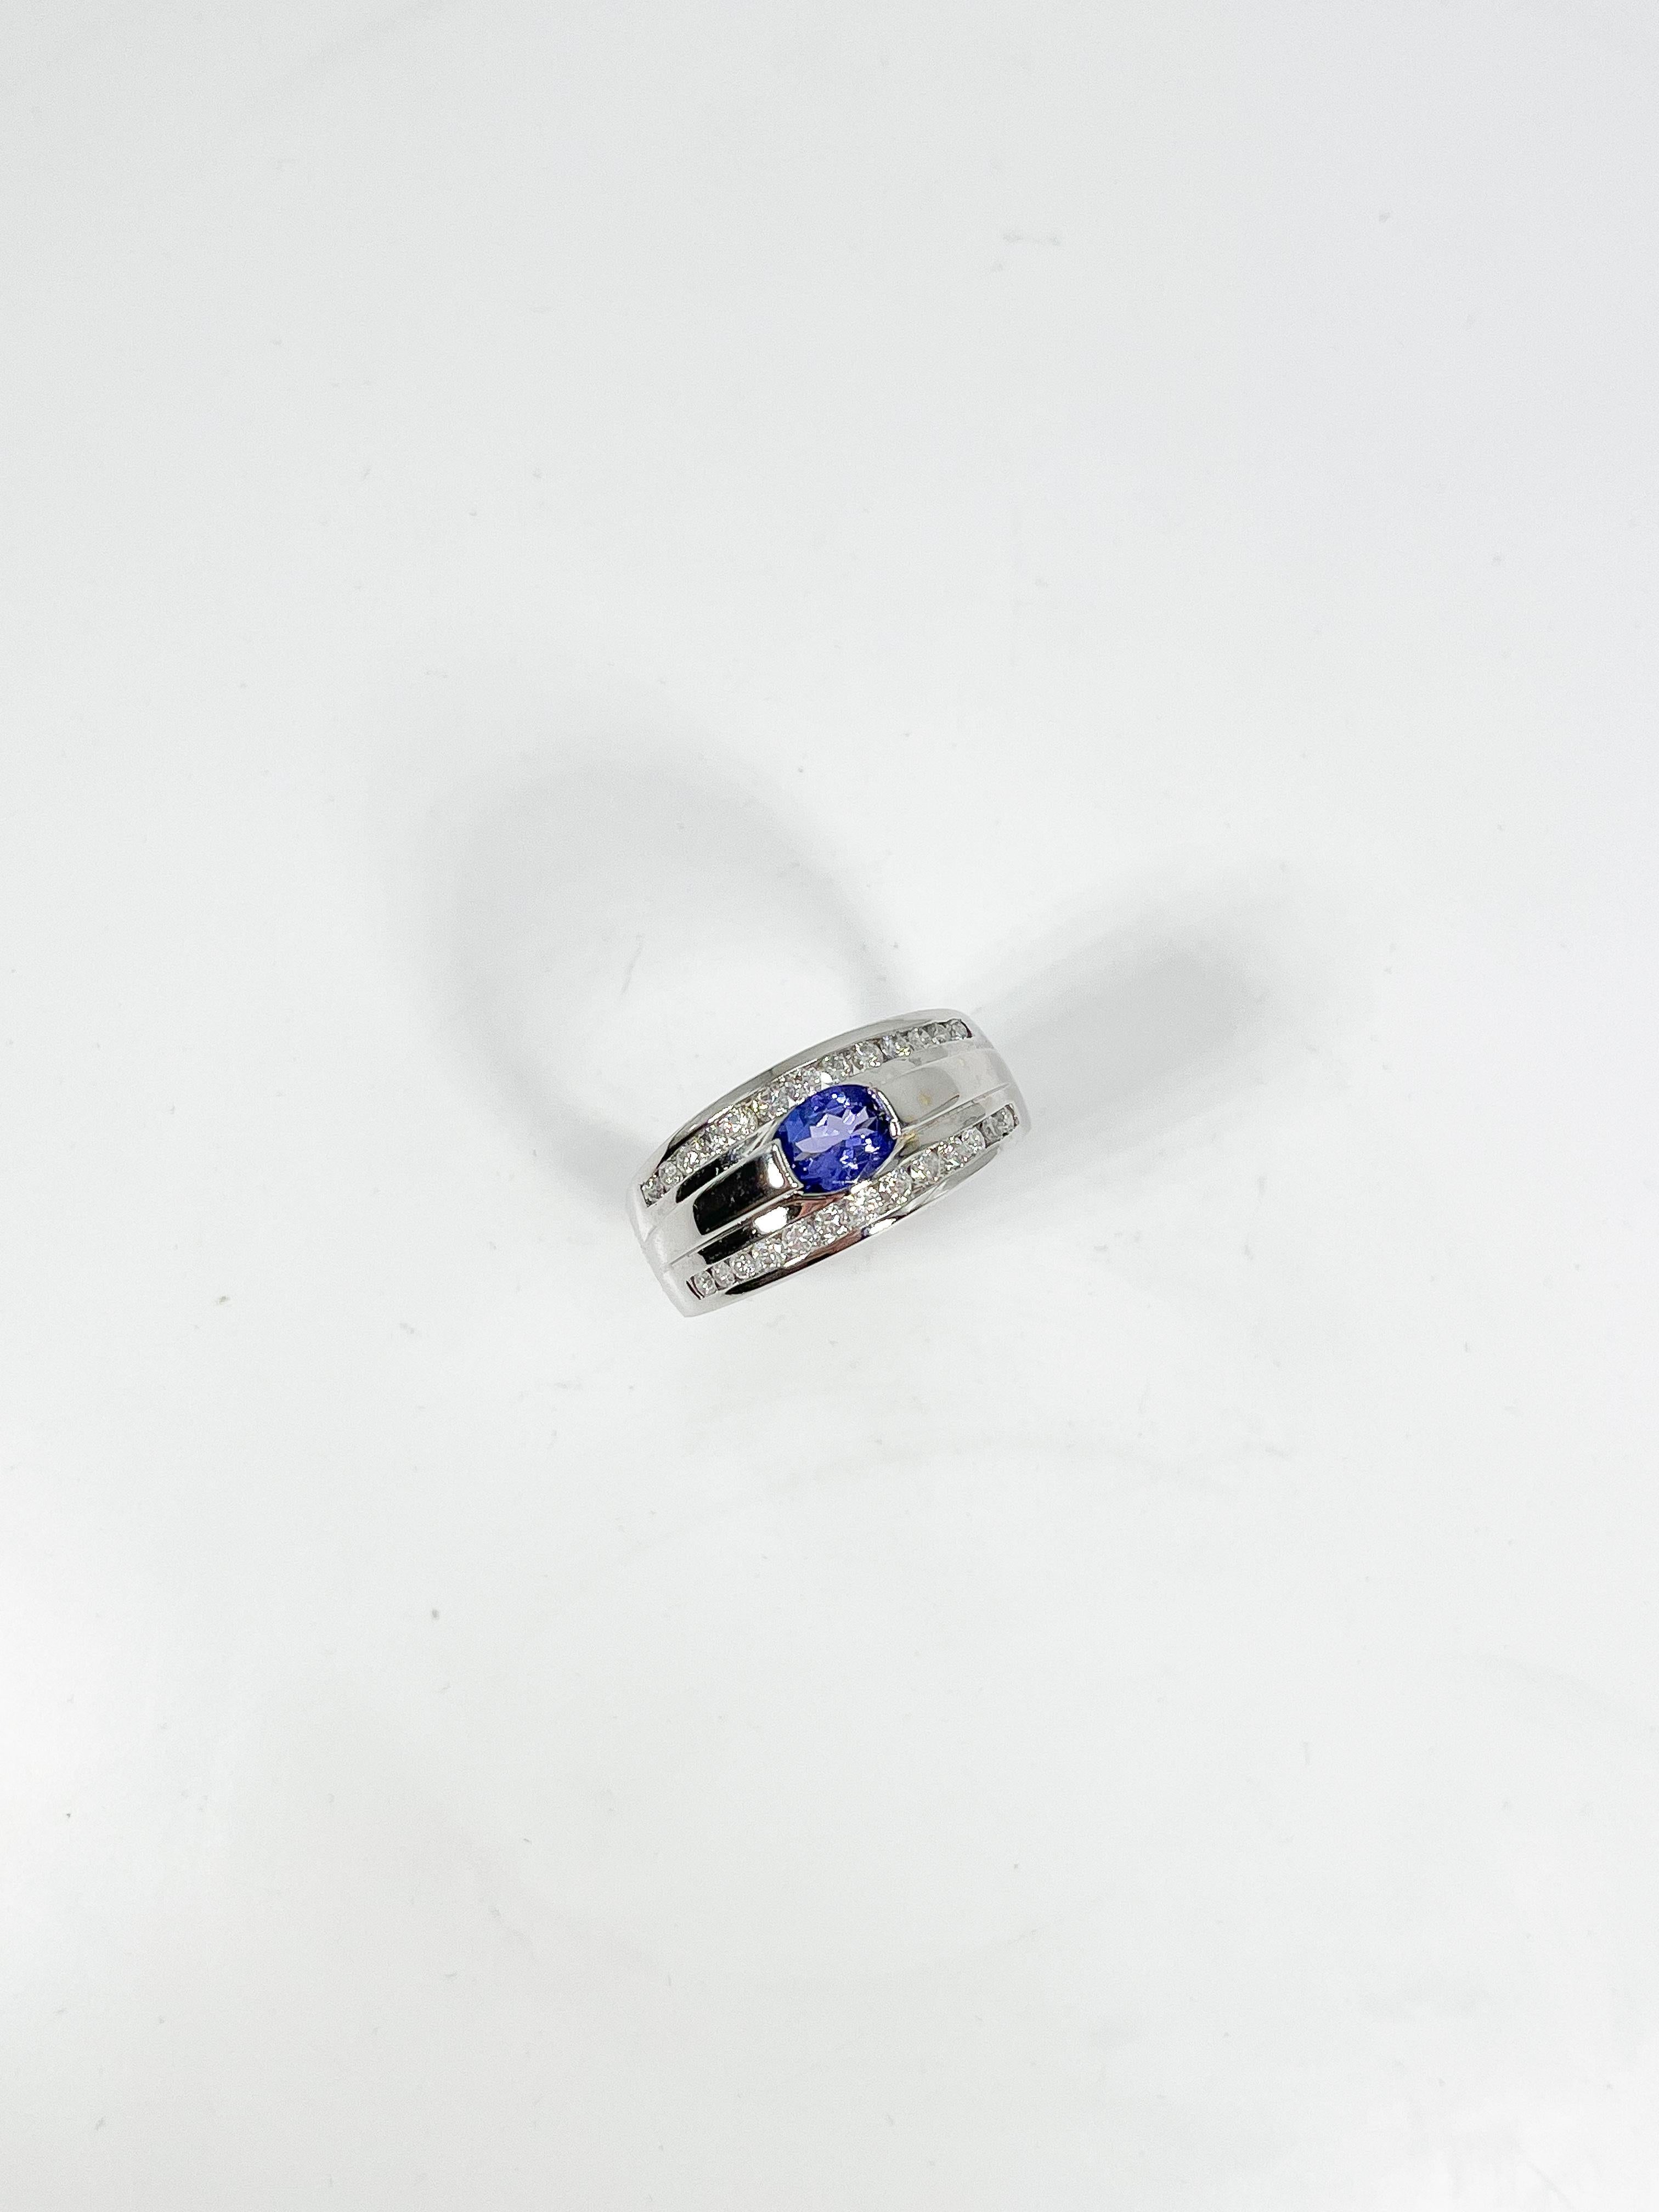 14k white gold tanzanite and diamond ring. Tanzanite stone is oval cut, the diamonds are all round, the width of the ring is 10 mm, the ring size is a 7, and it has a total weight of 9.46 grams.